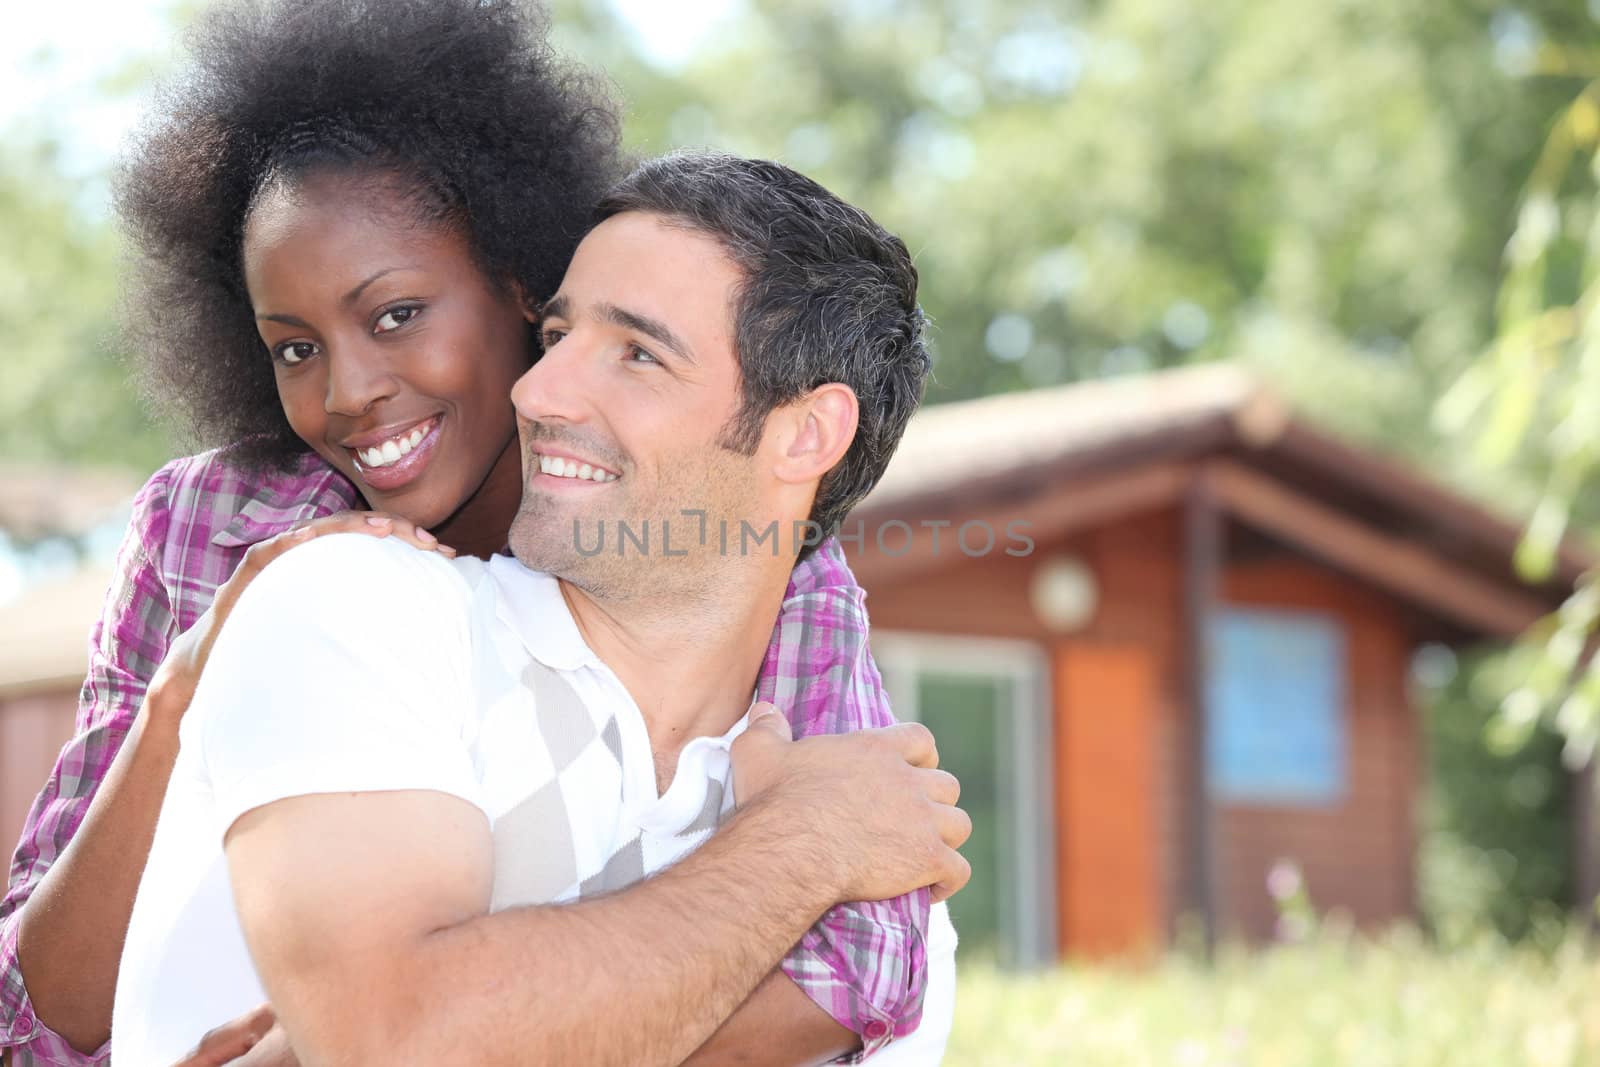 Couple in front of chalet